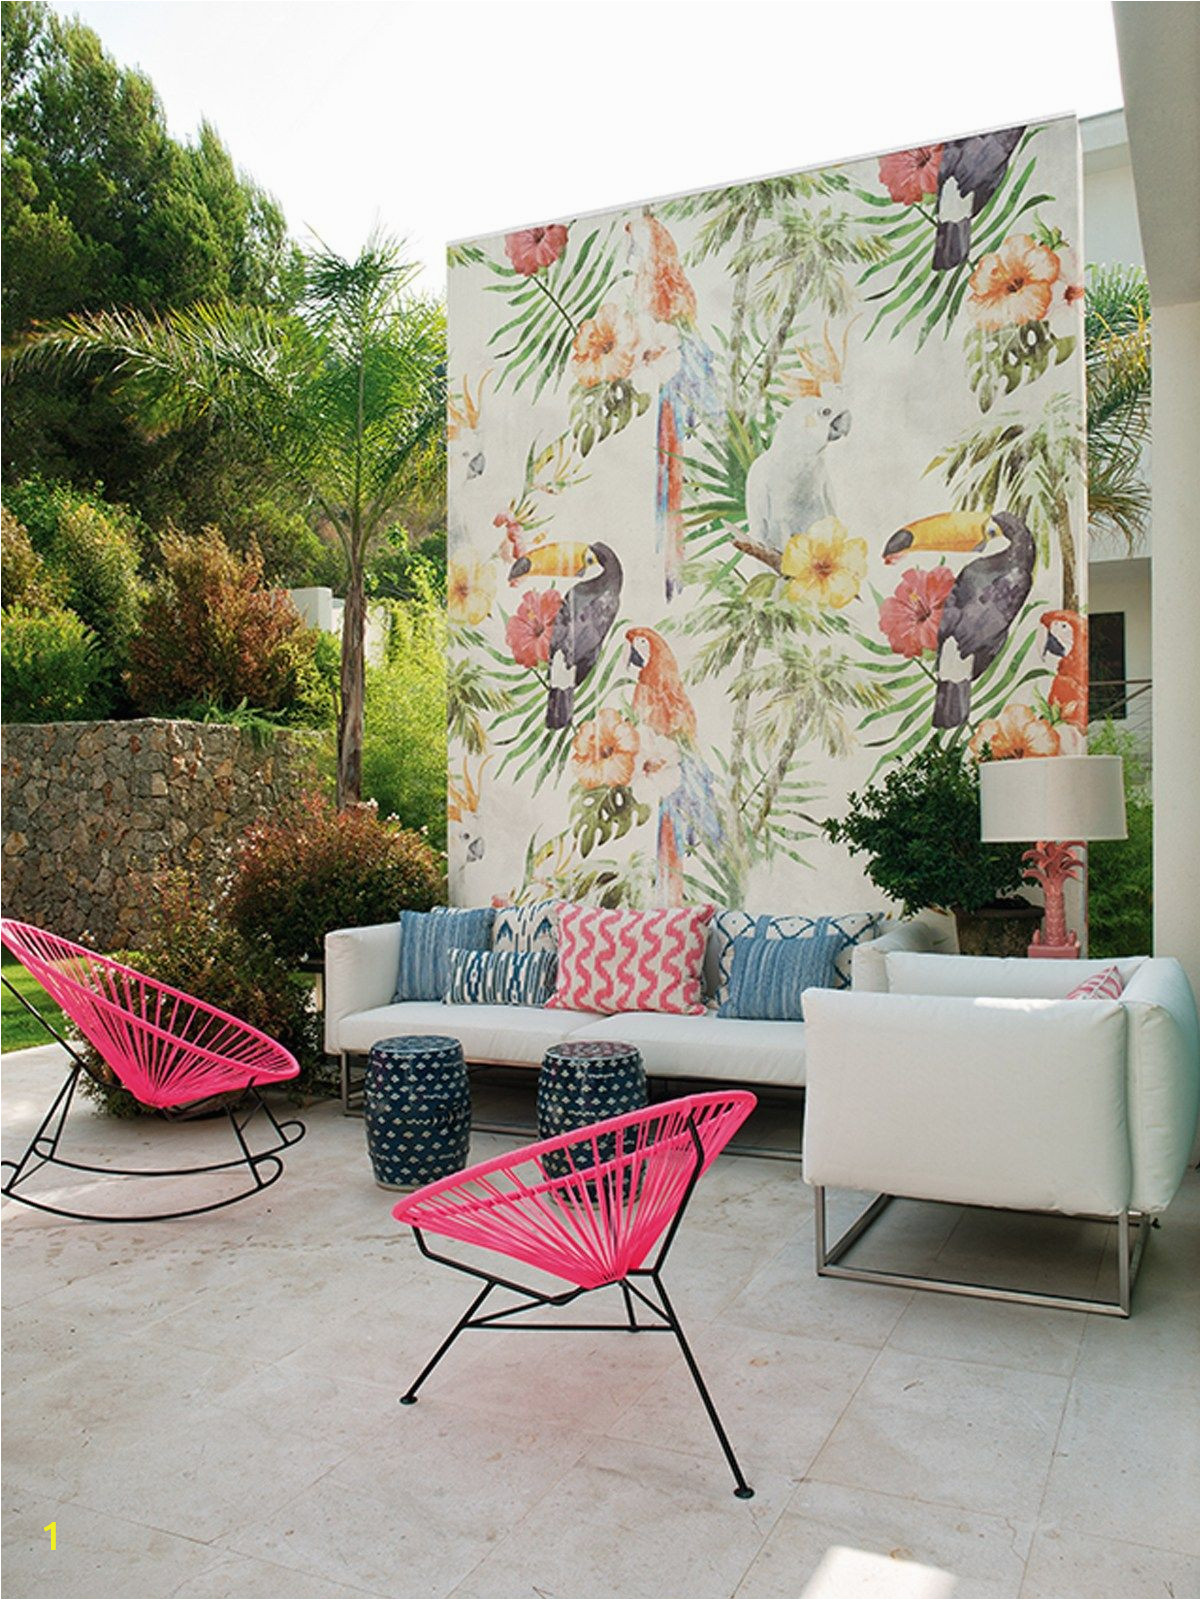 Outdoor Wall Murals for the Garden Wall&dec² at Made Expo Essential Wallpaper Style Colors